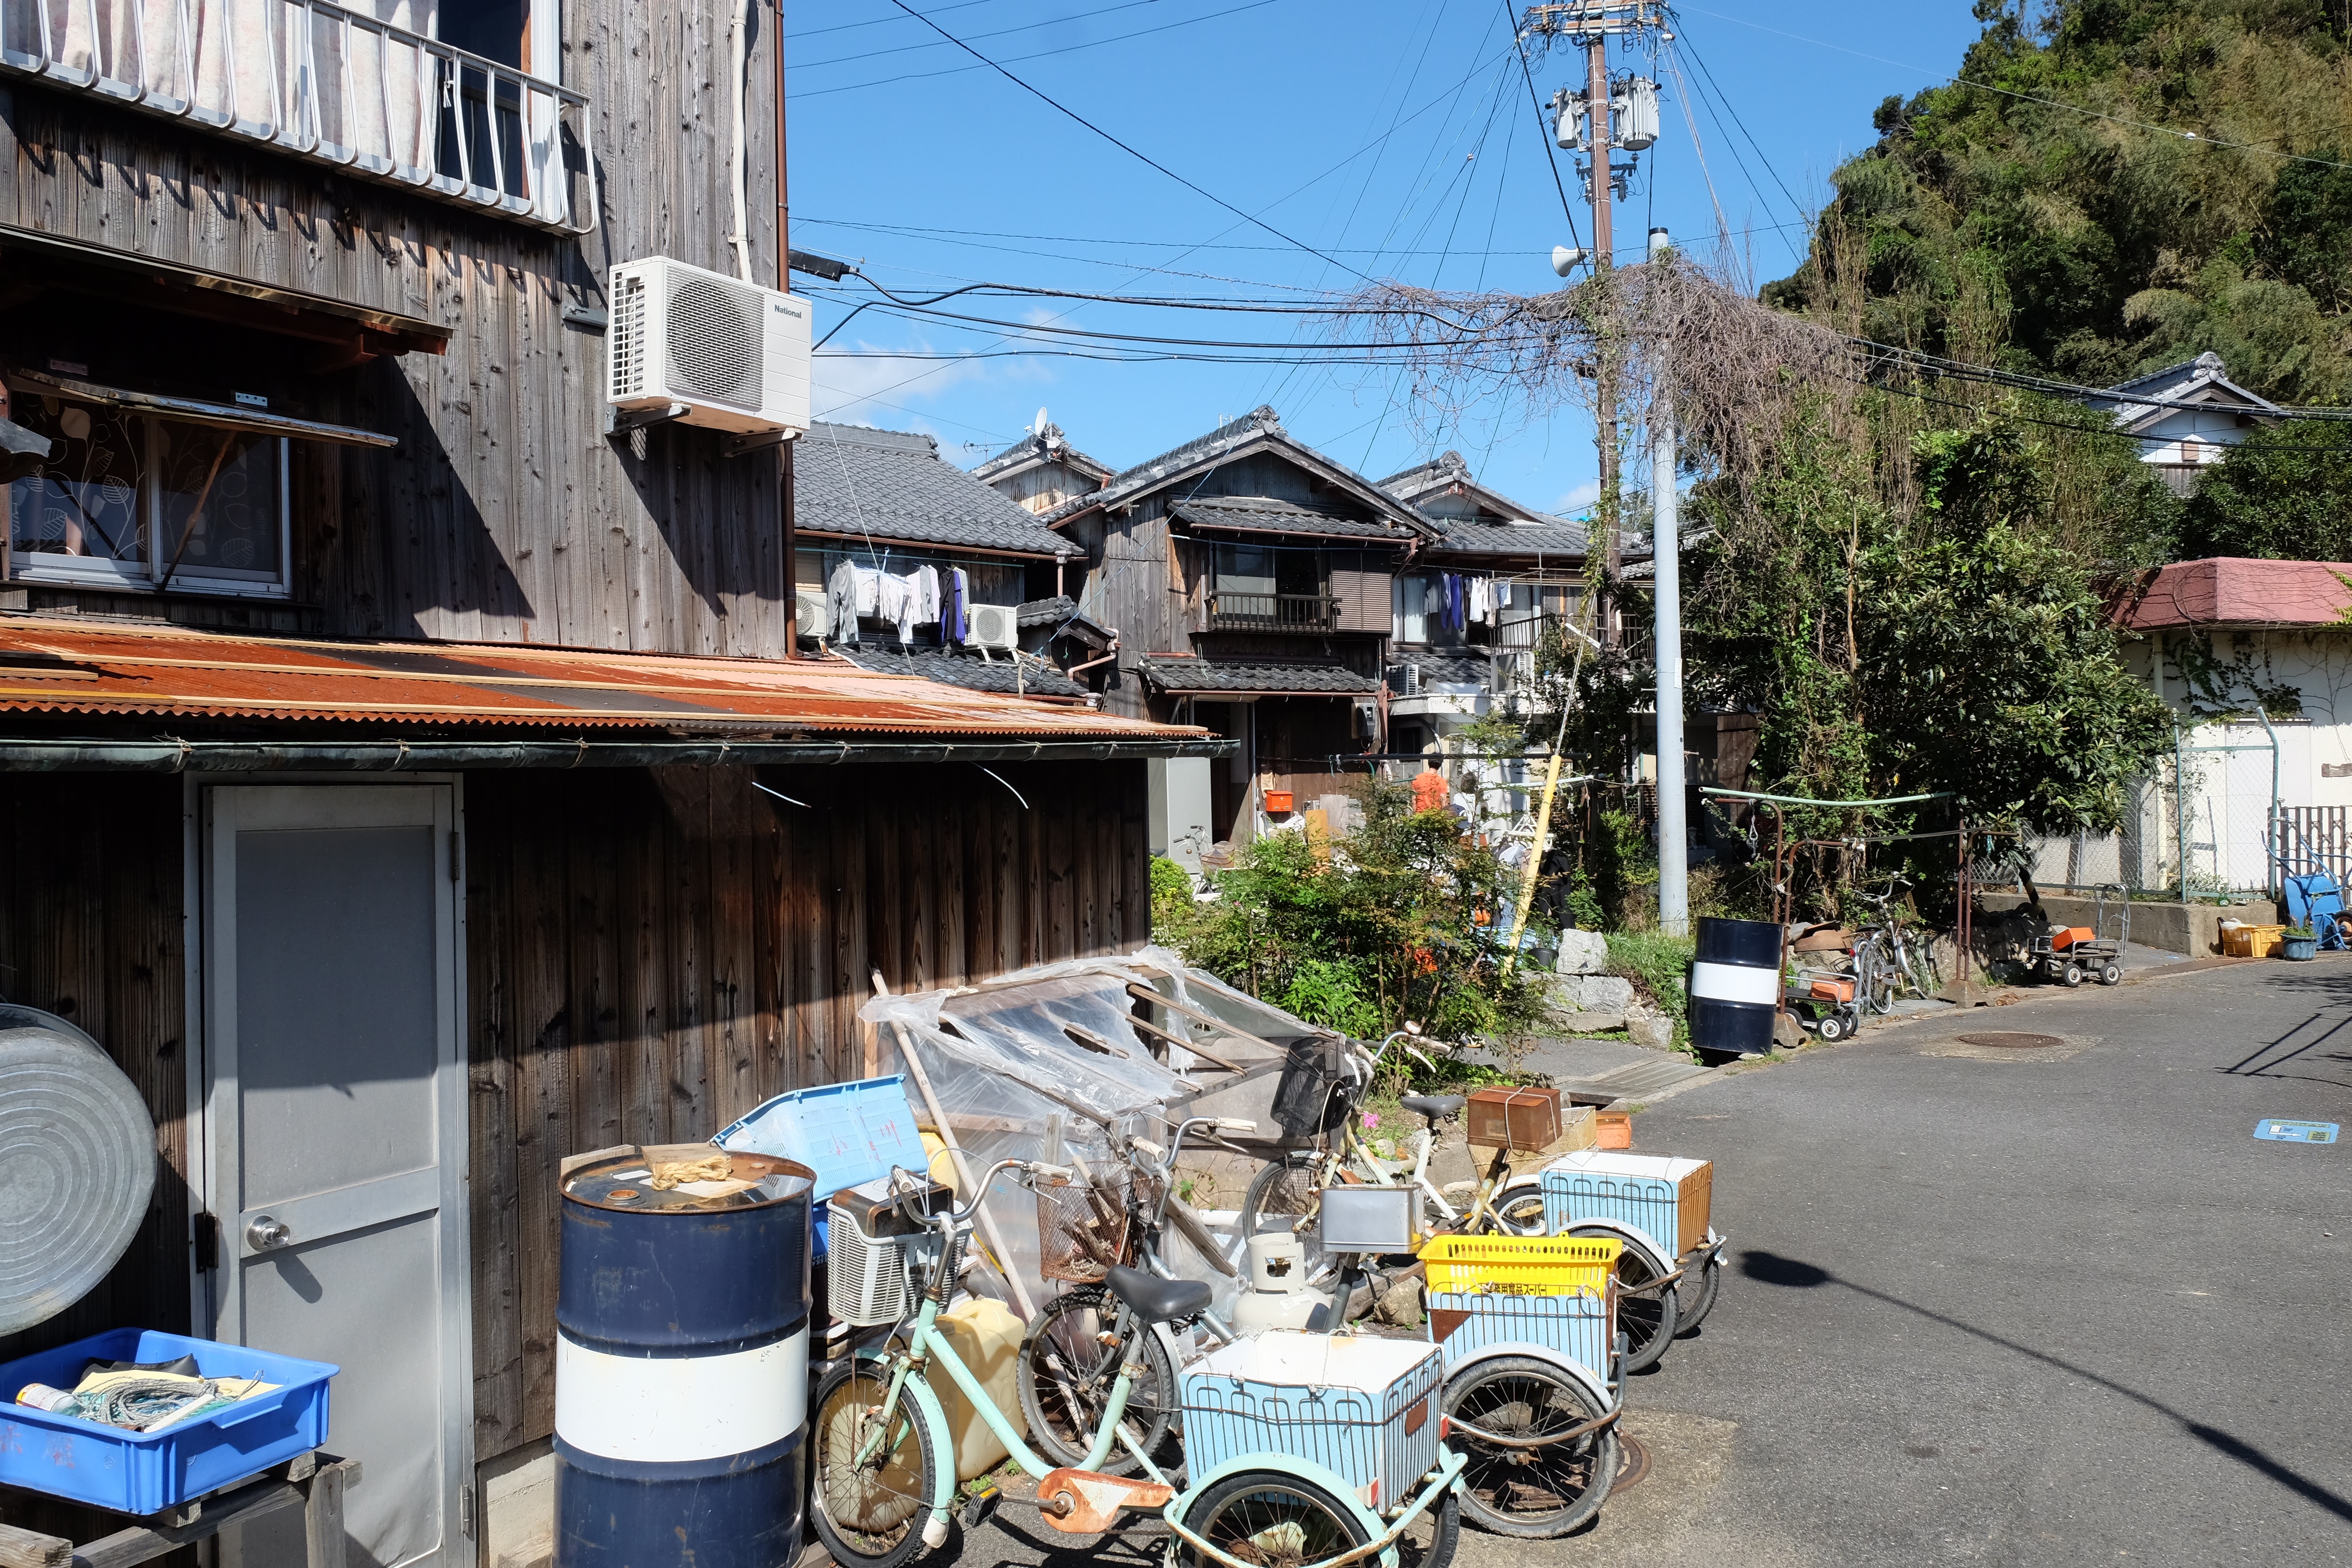 One of the narrow roads on Okishima. The island is car-free, with tricycles the favoured mode of transport. (8 October 2018)